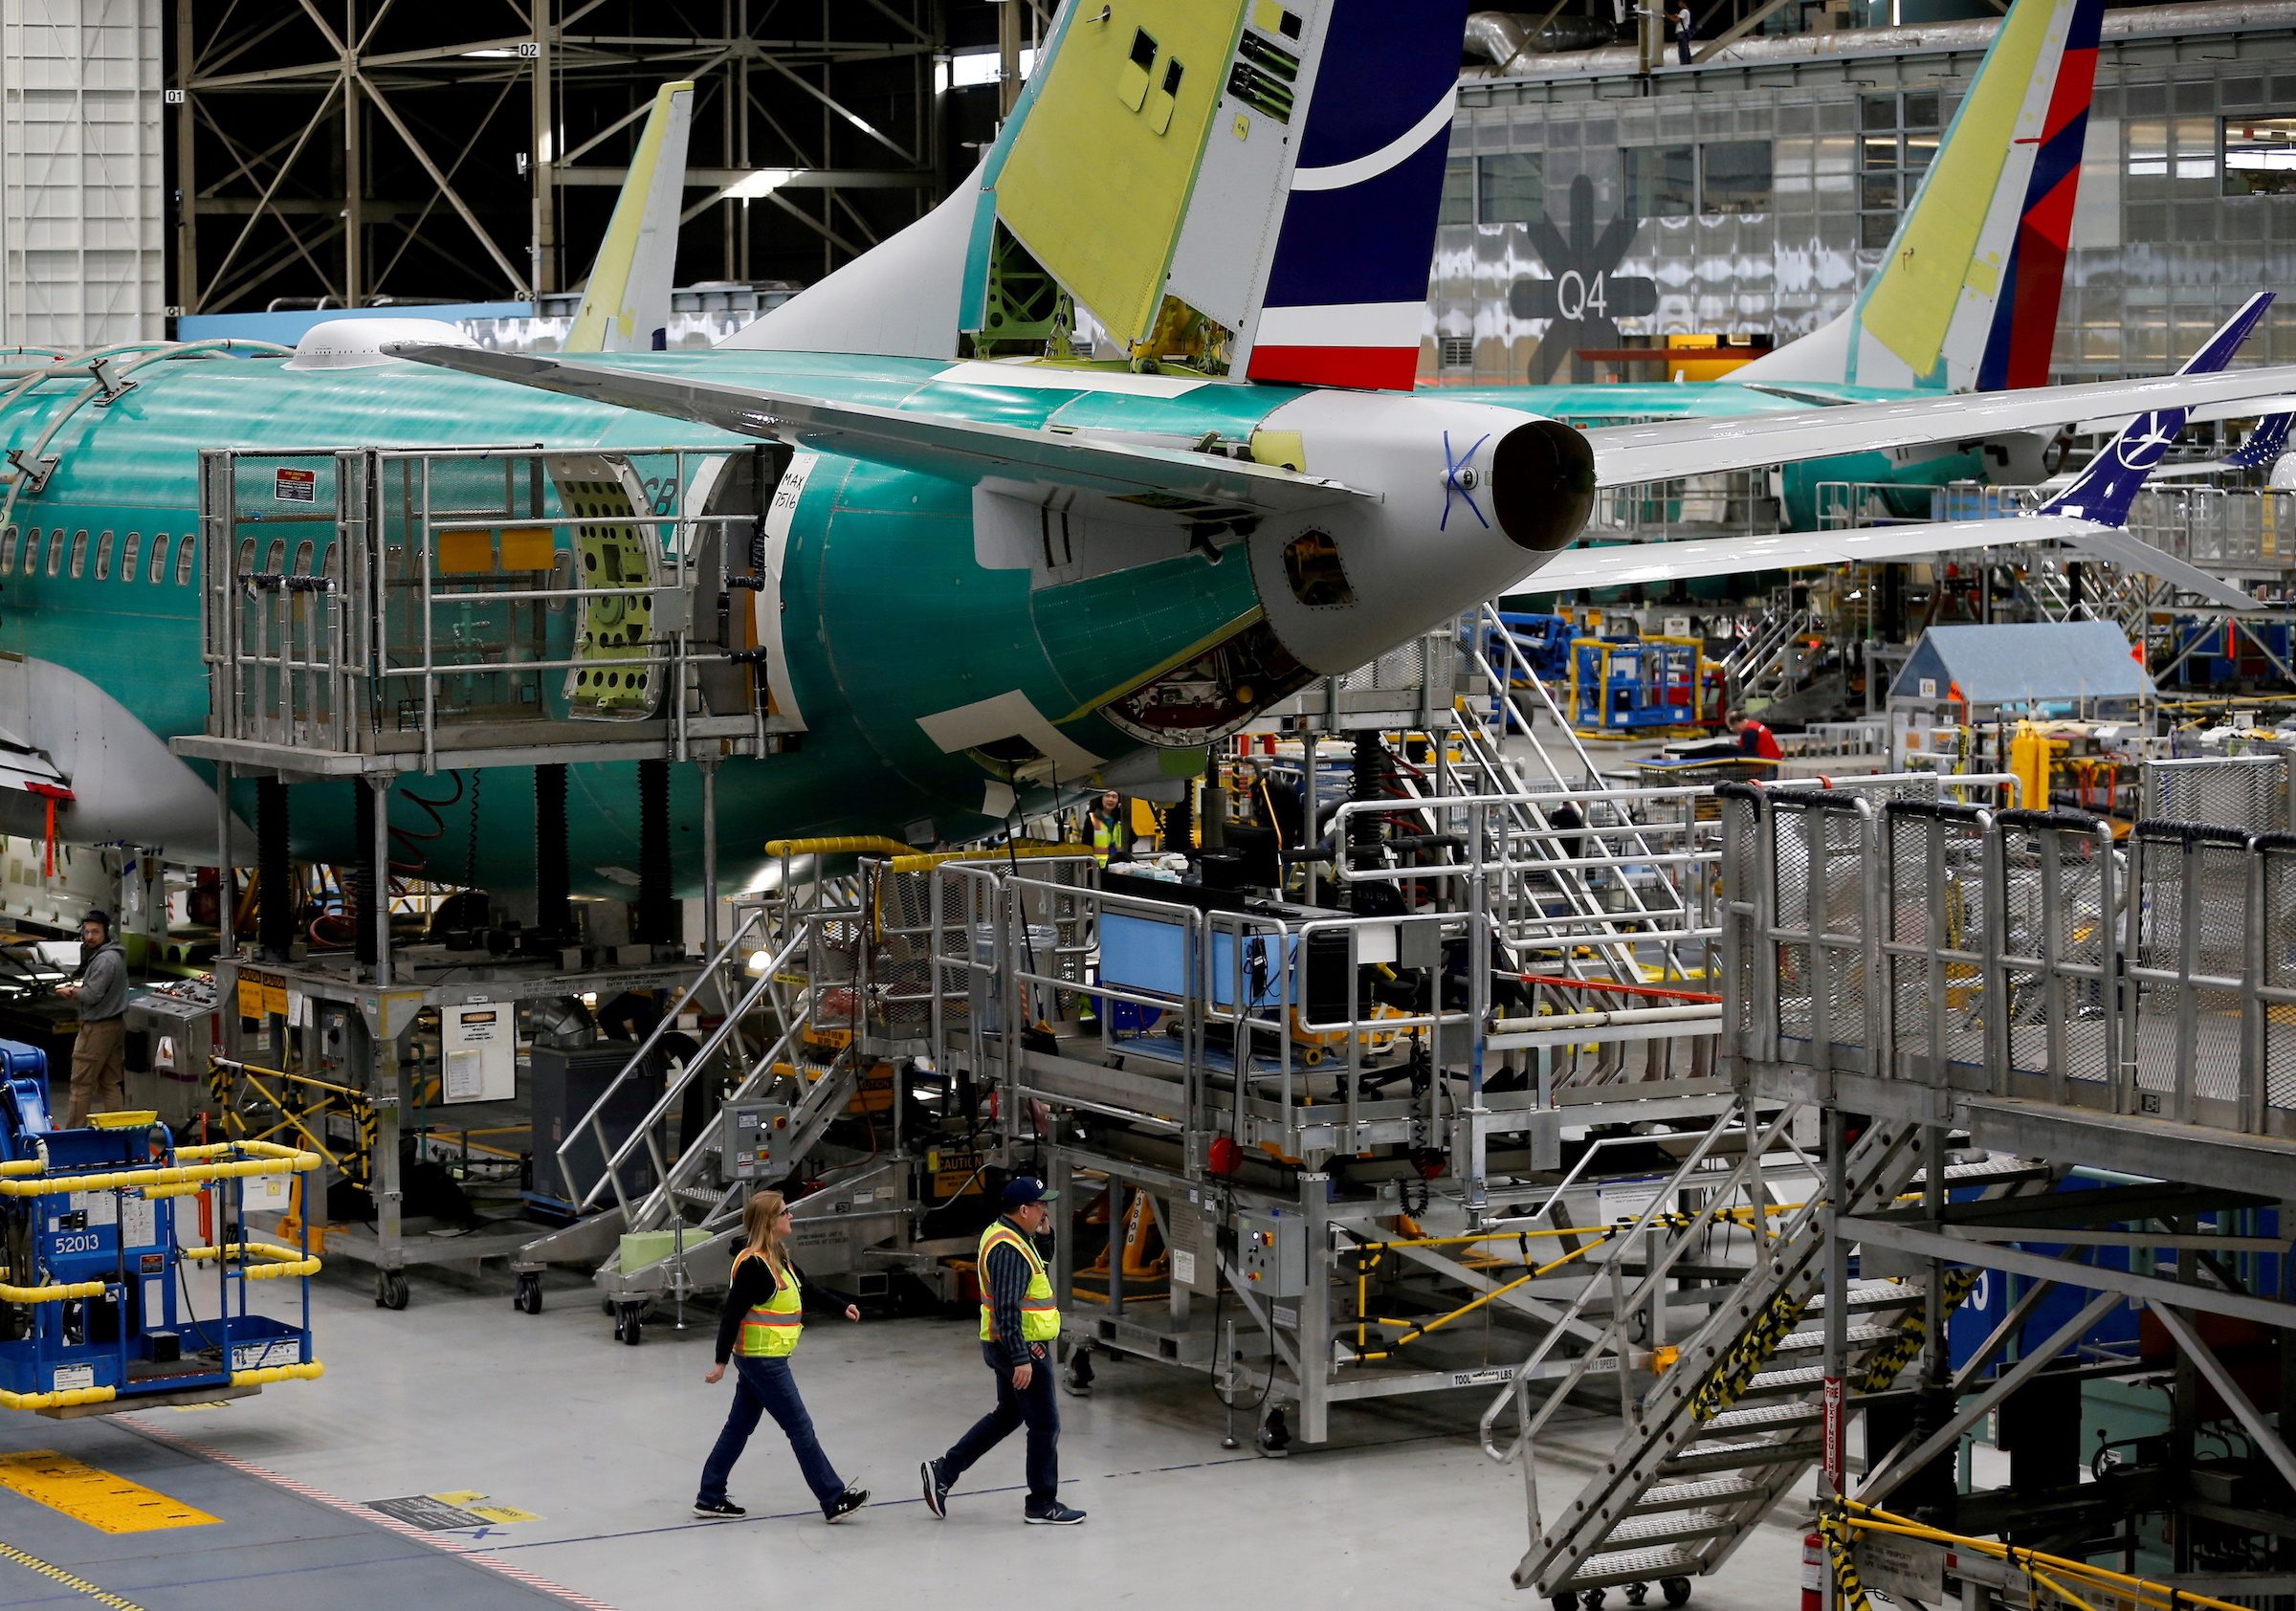 Leasing firms buy more planes than ailing airlines for first time